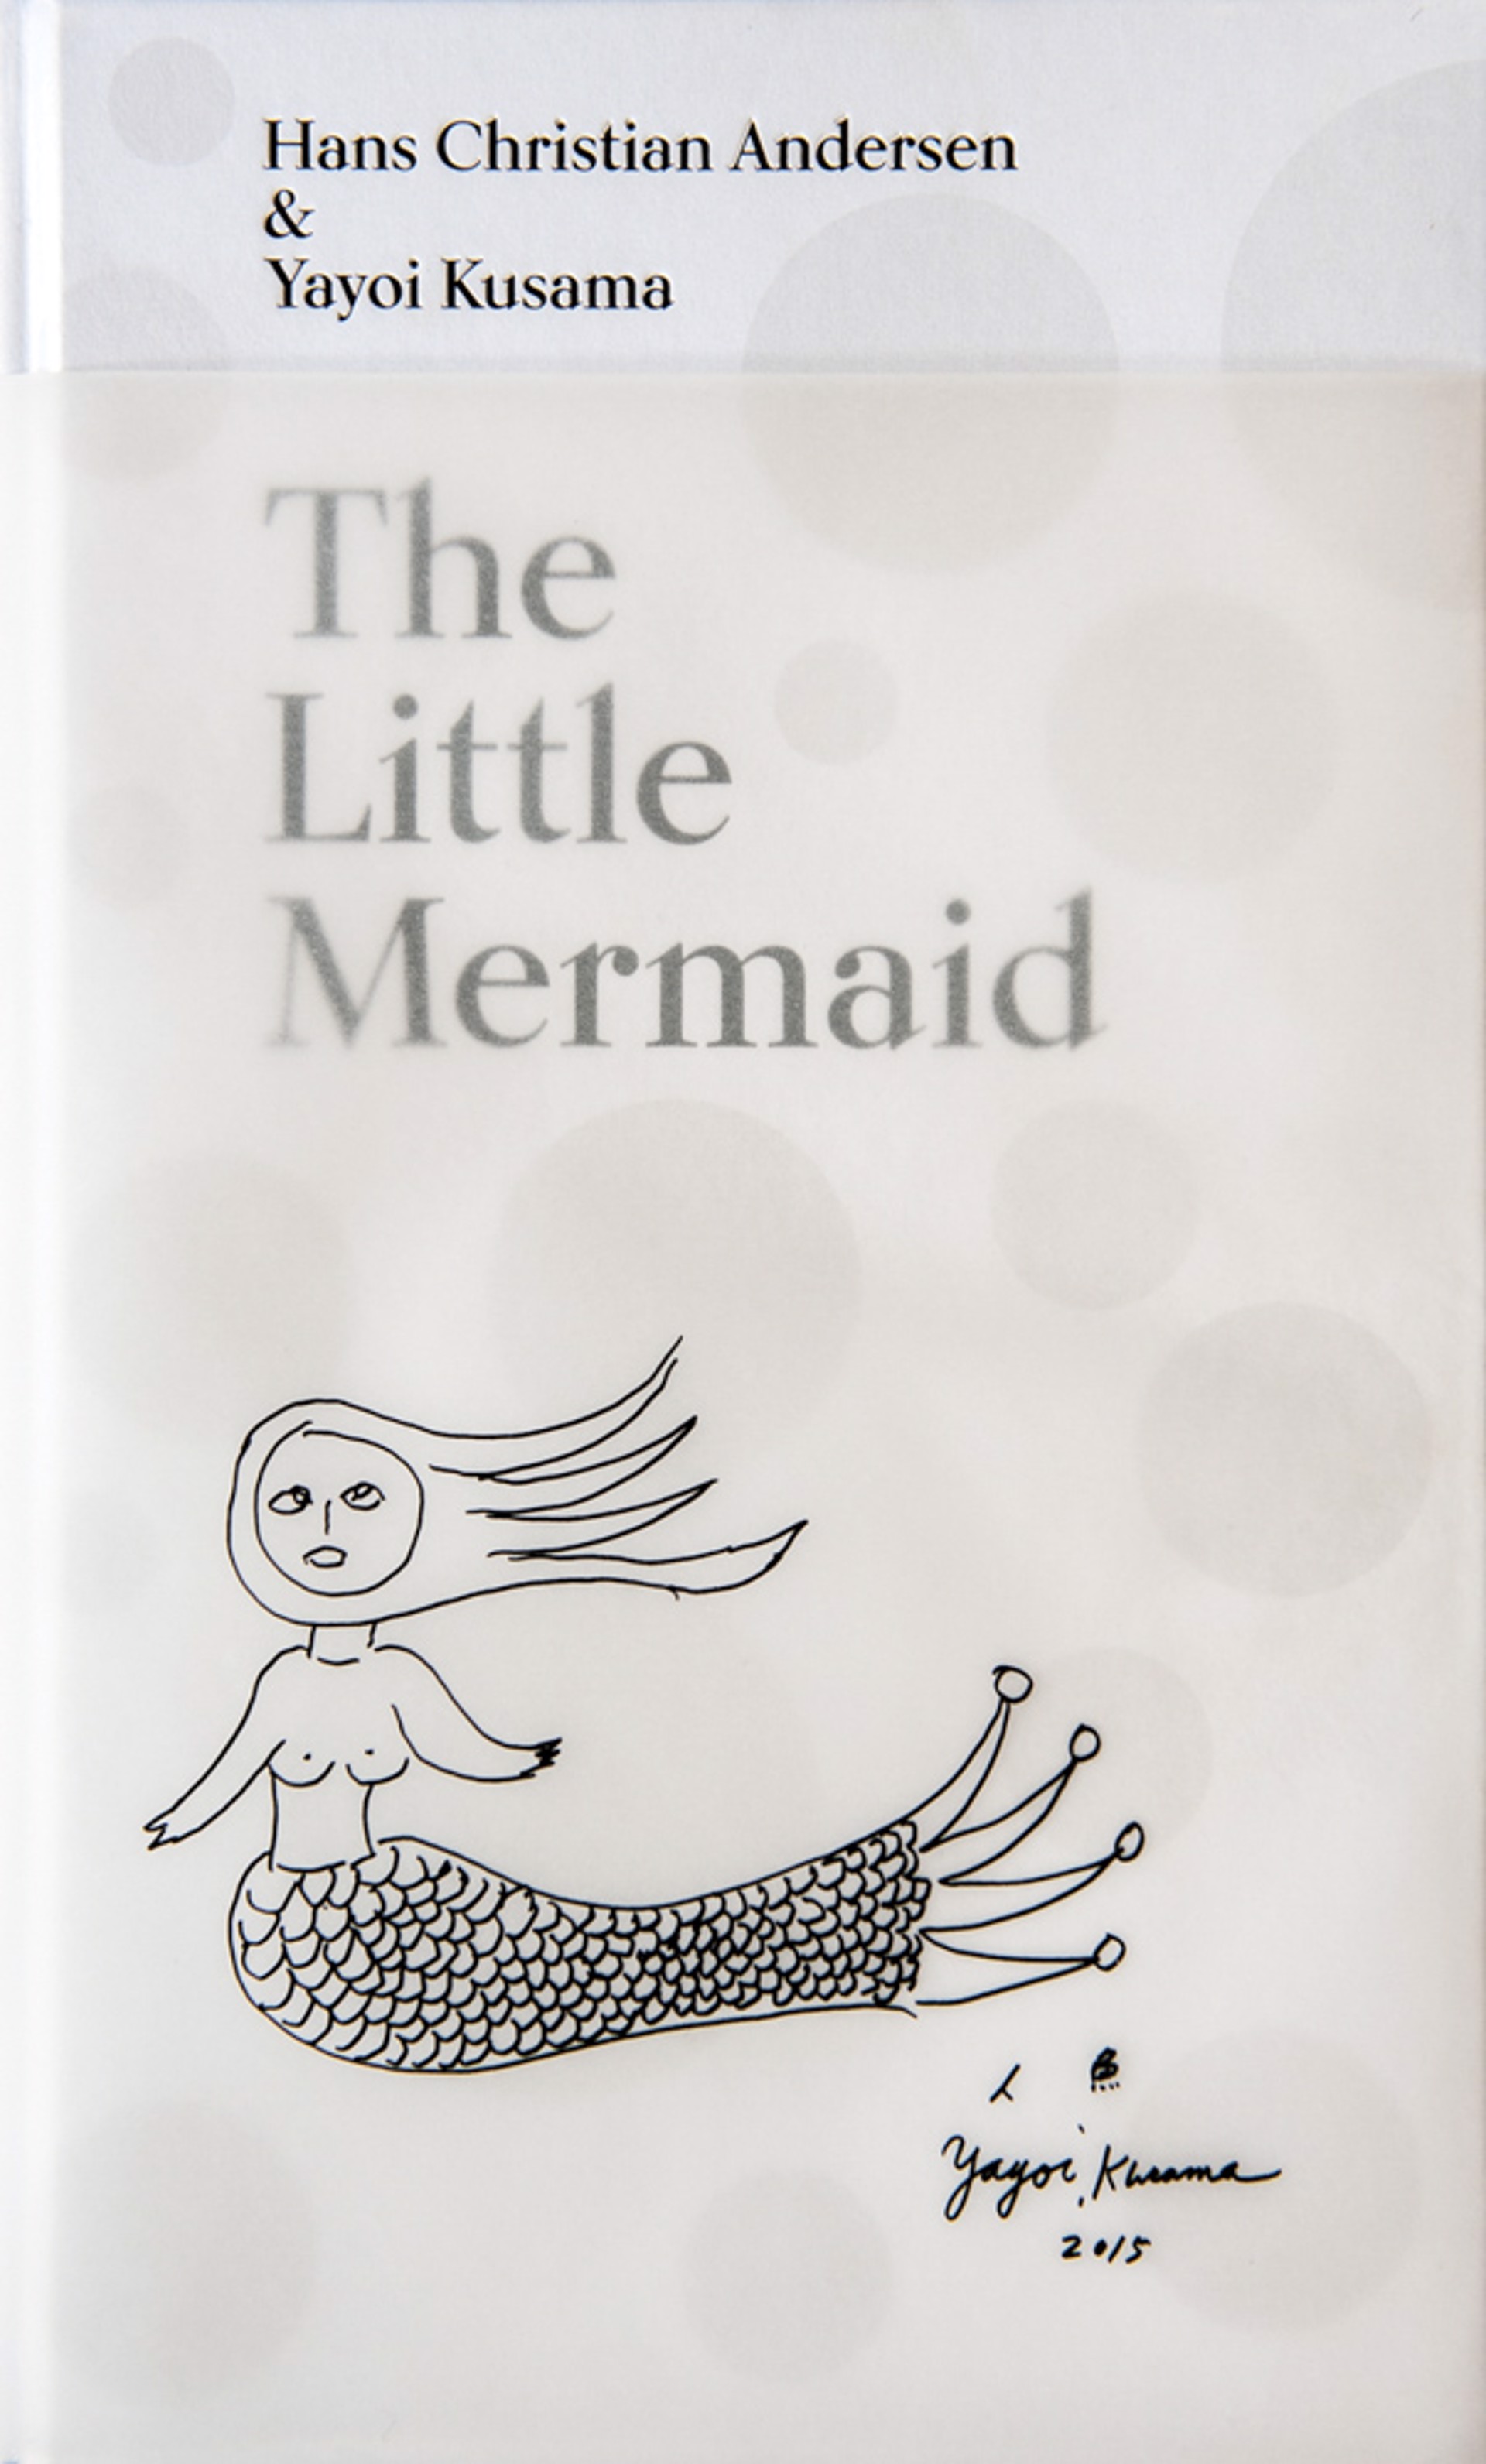 The Little Mermaid: A Fairy Tale of Infinity and Love Forever by Yayoi Kusama